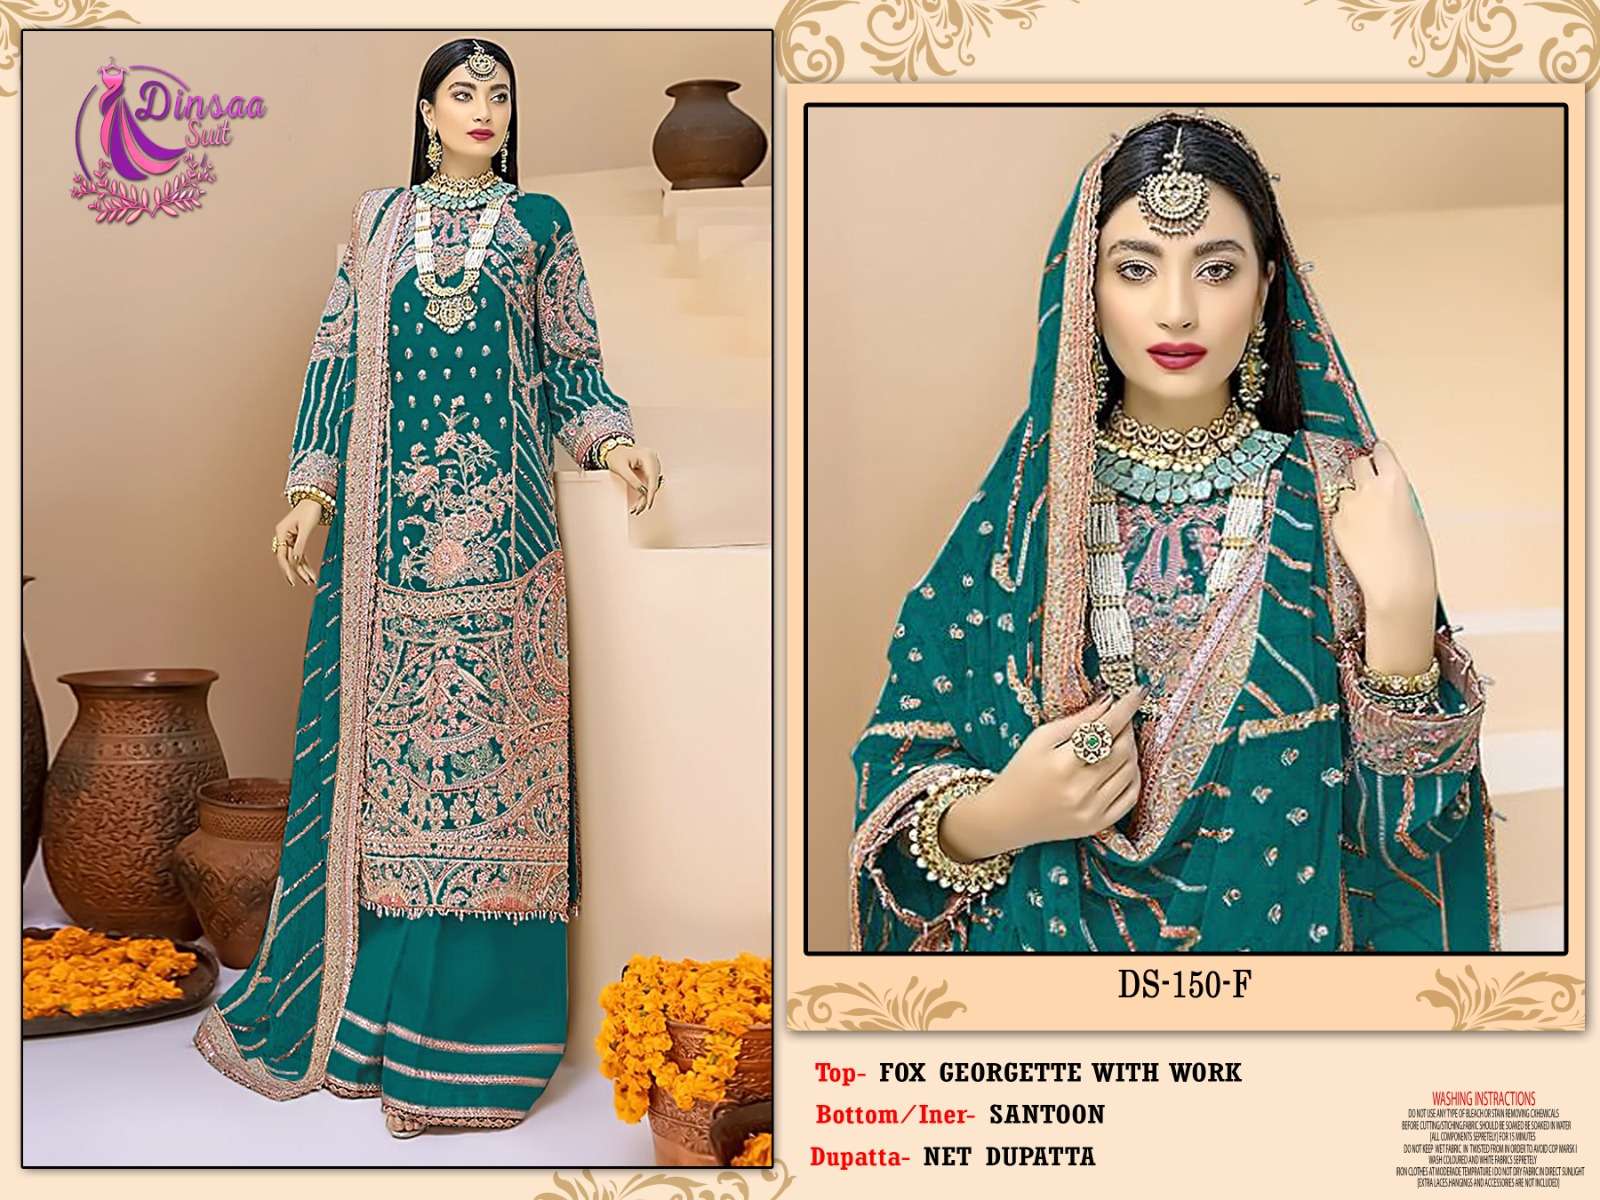 DINSAA SUITS PRESENTS 150 E GEORGETTE WITH EMBROIDERY WHOLESALE PAKISTANI SUITS